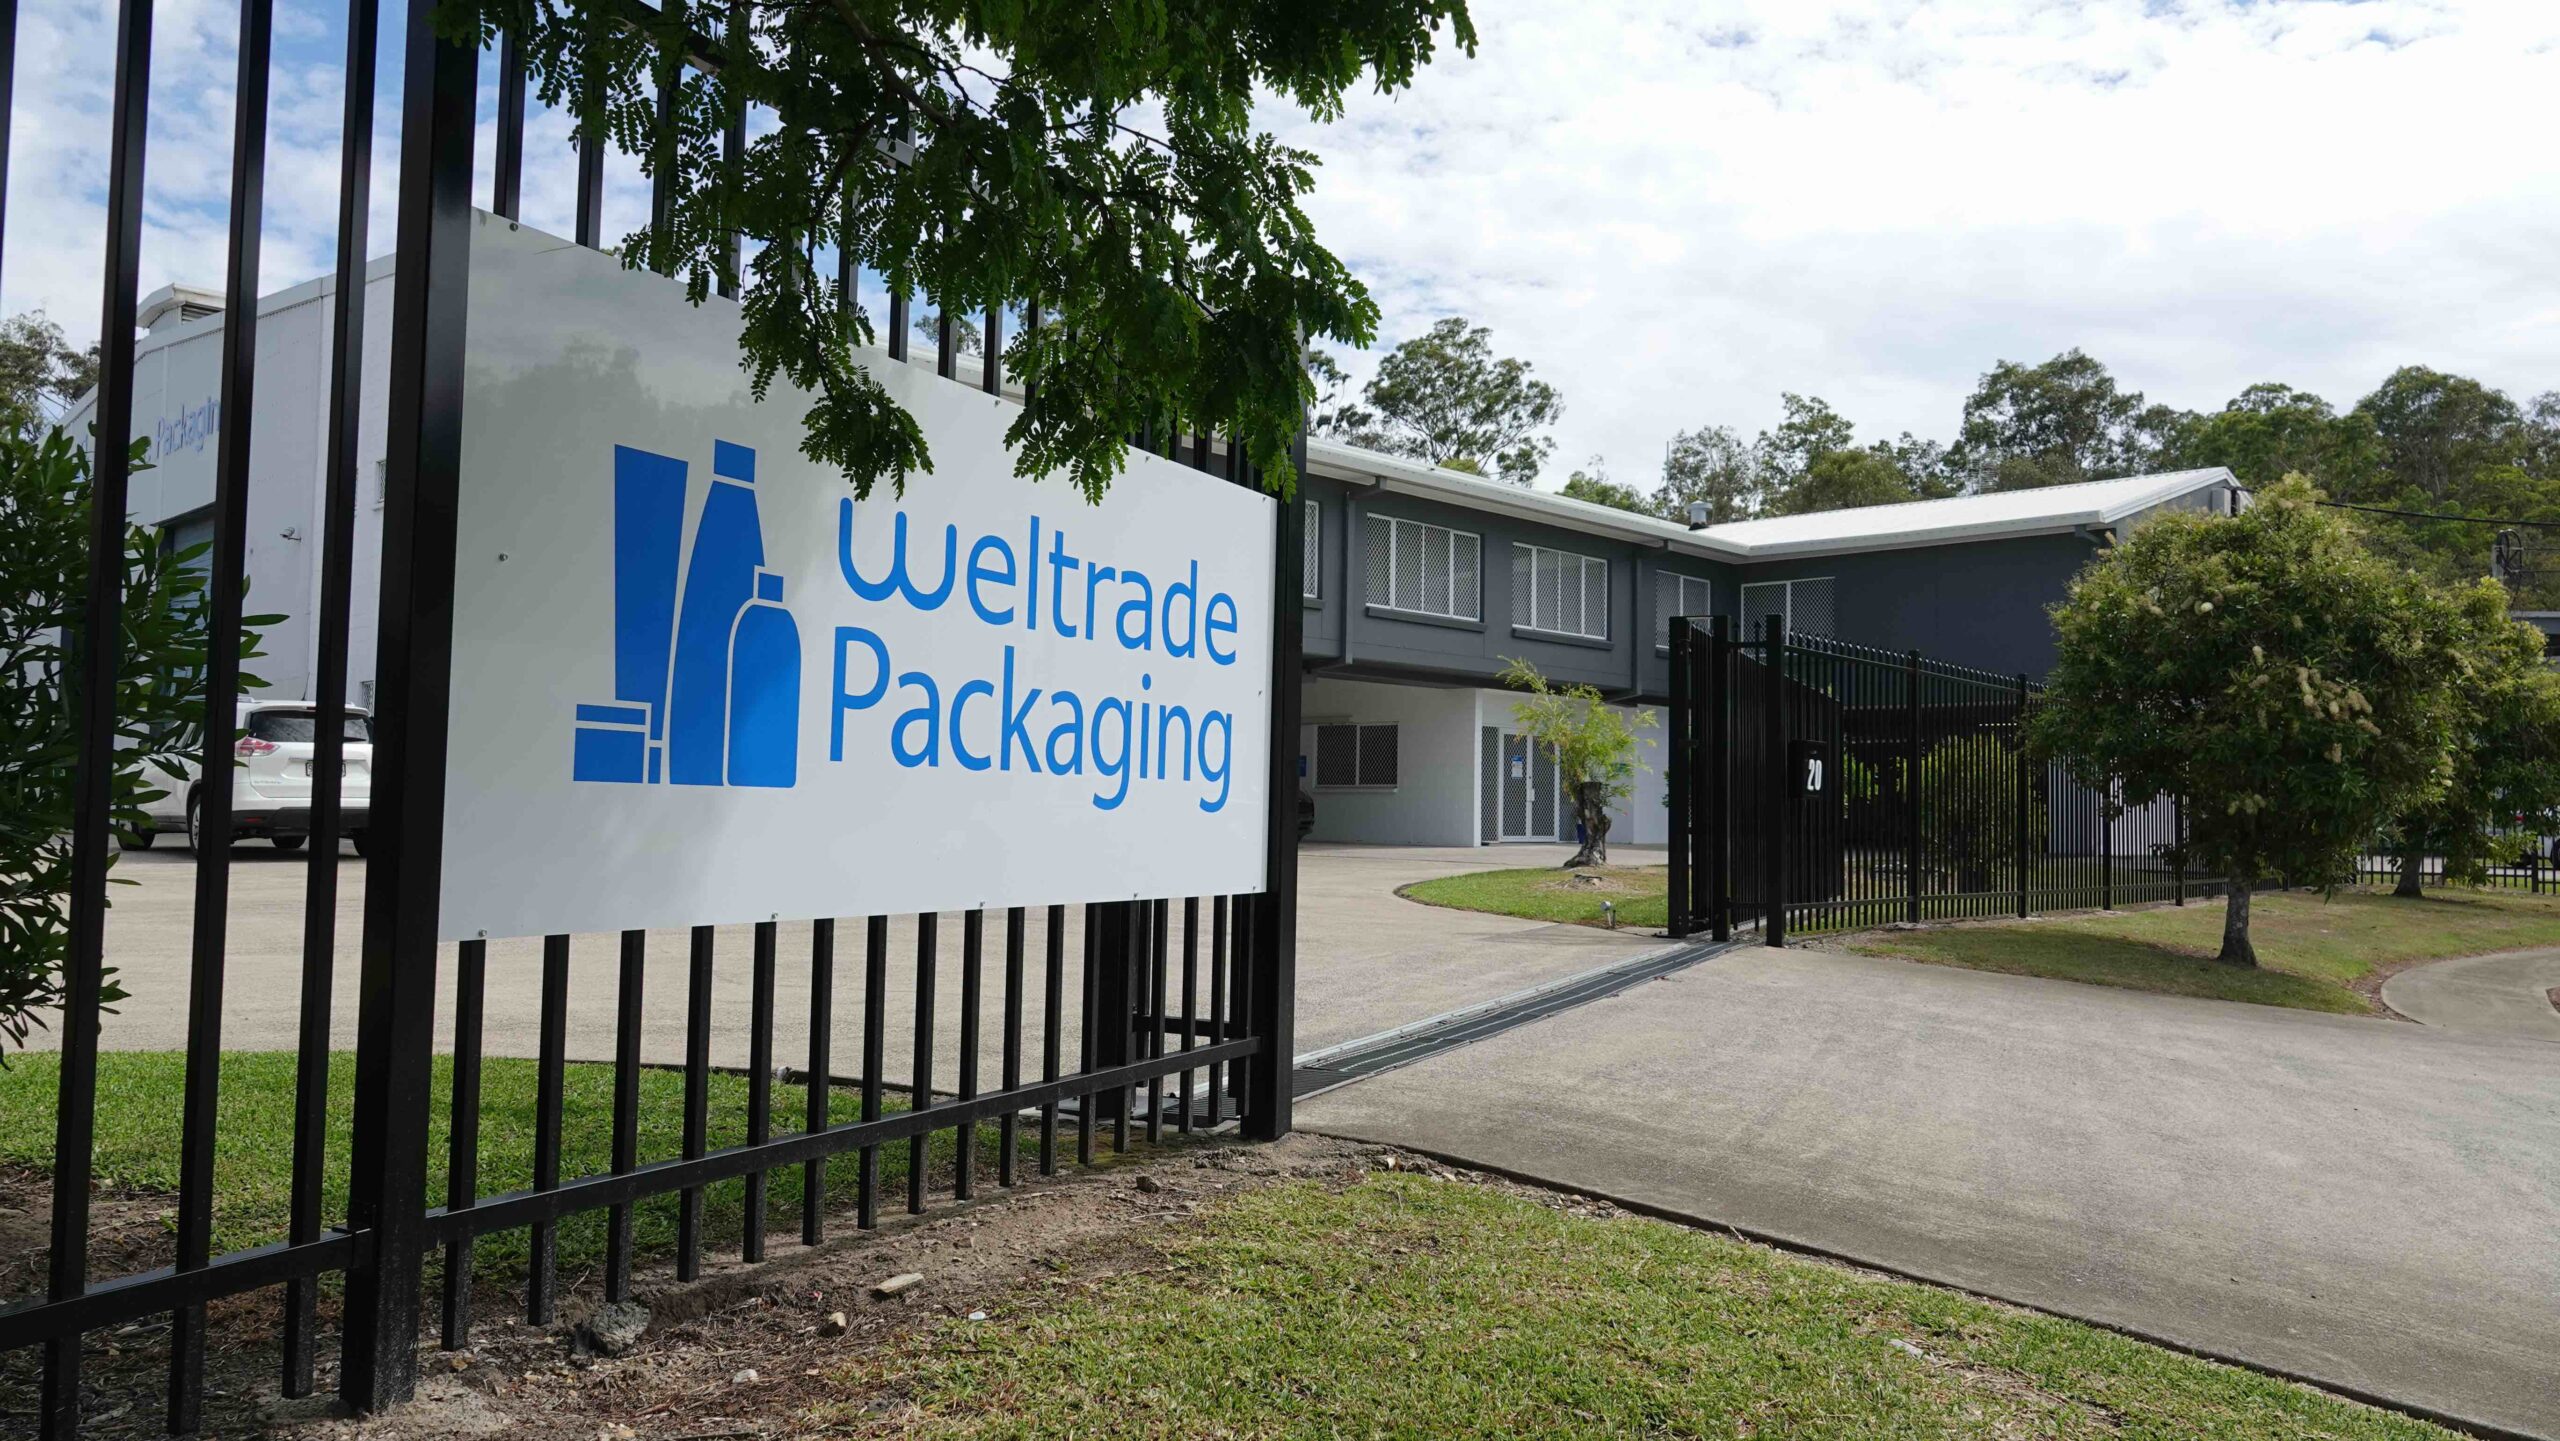 Weltrade Packaging’s New Facility